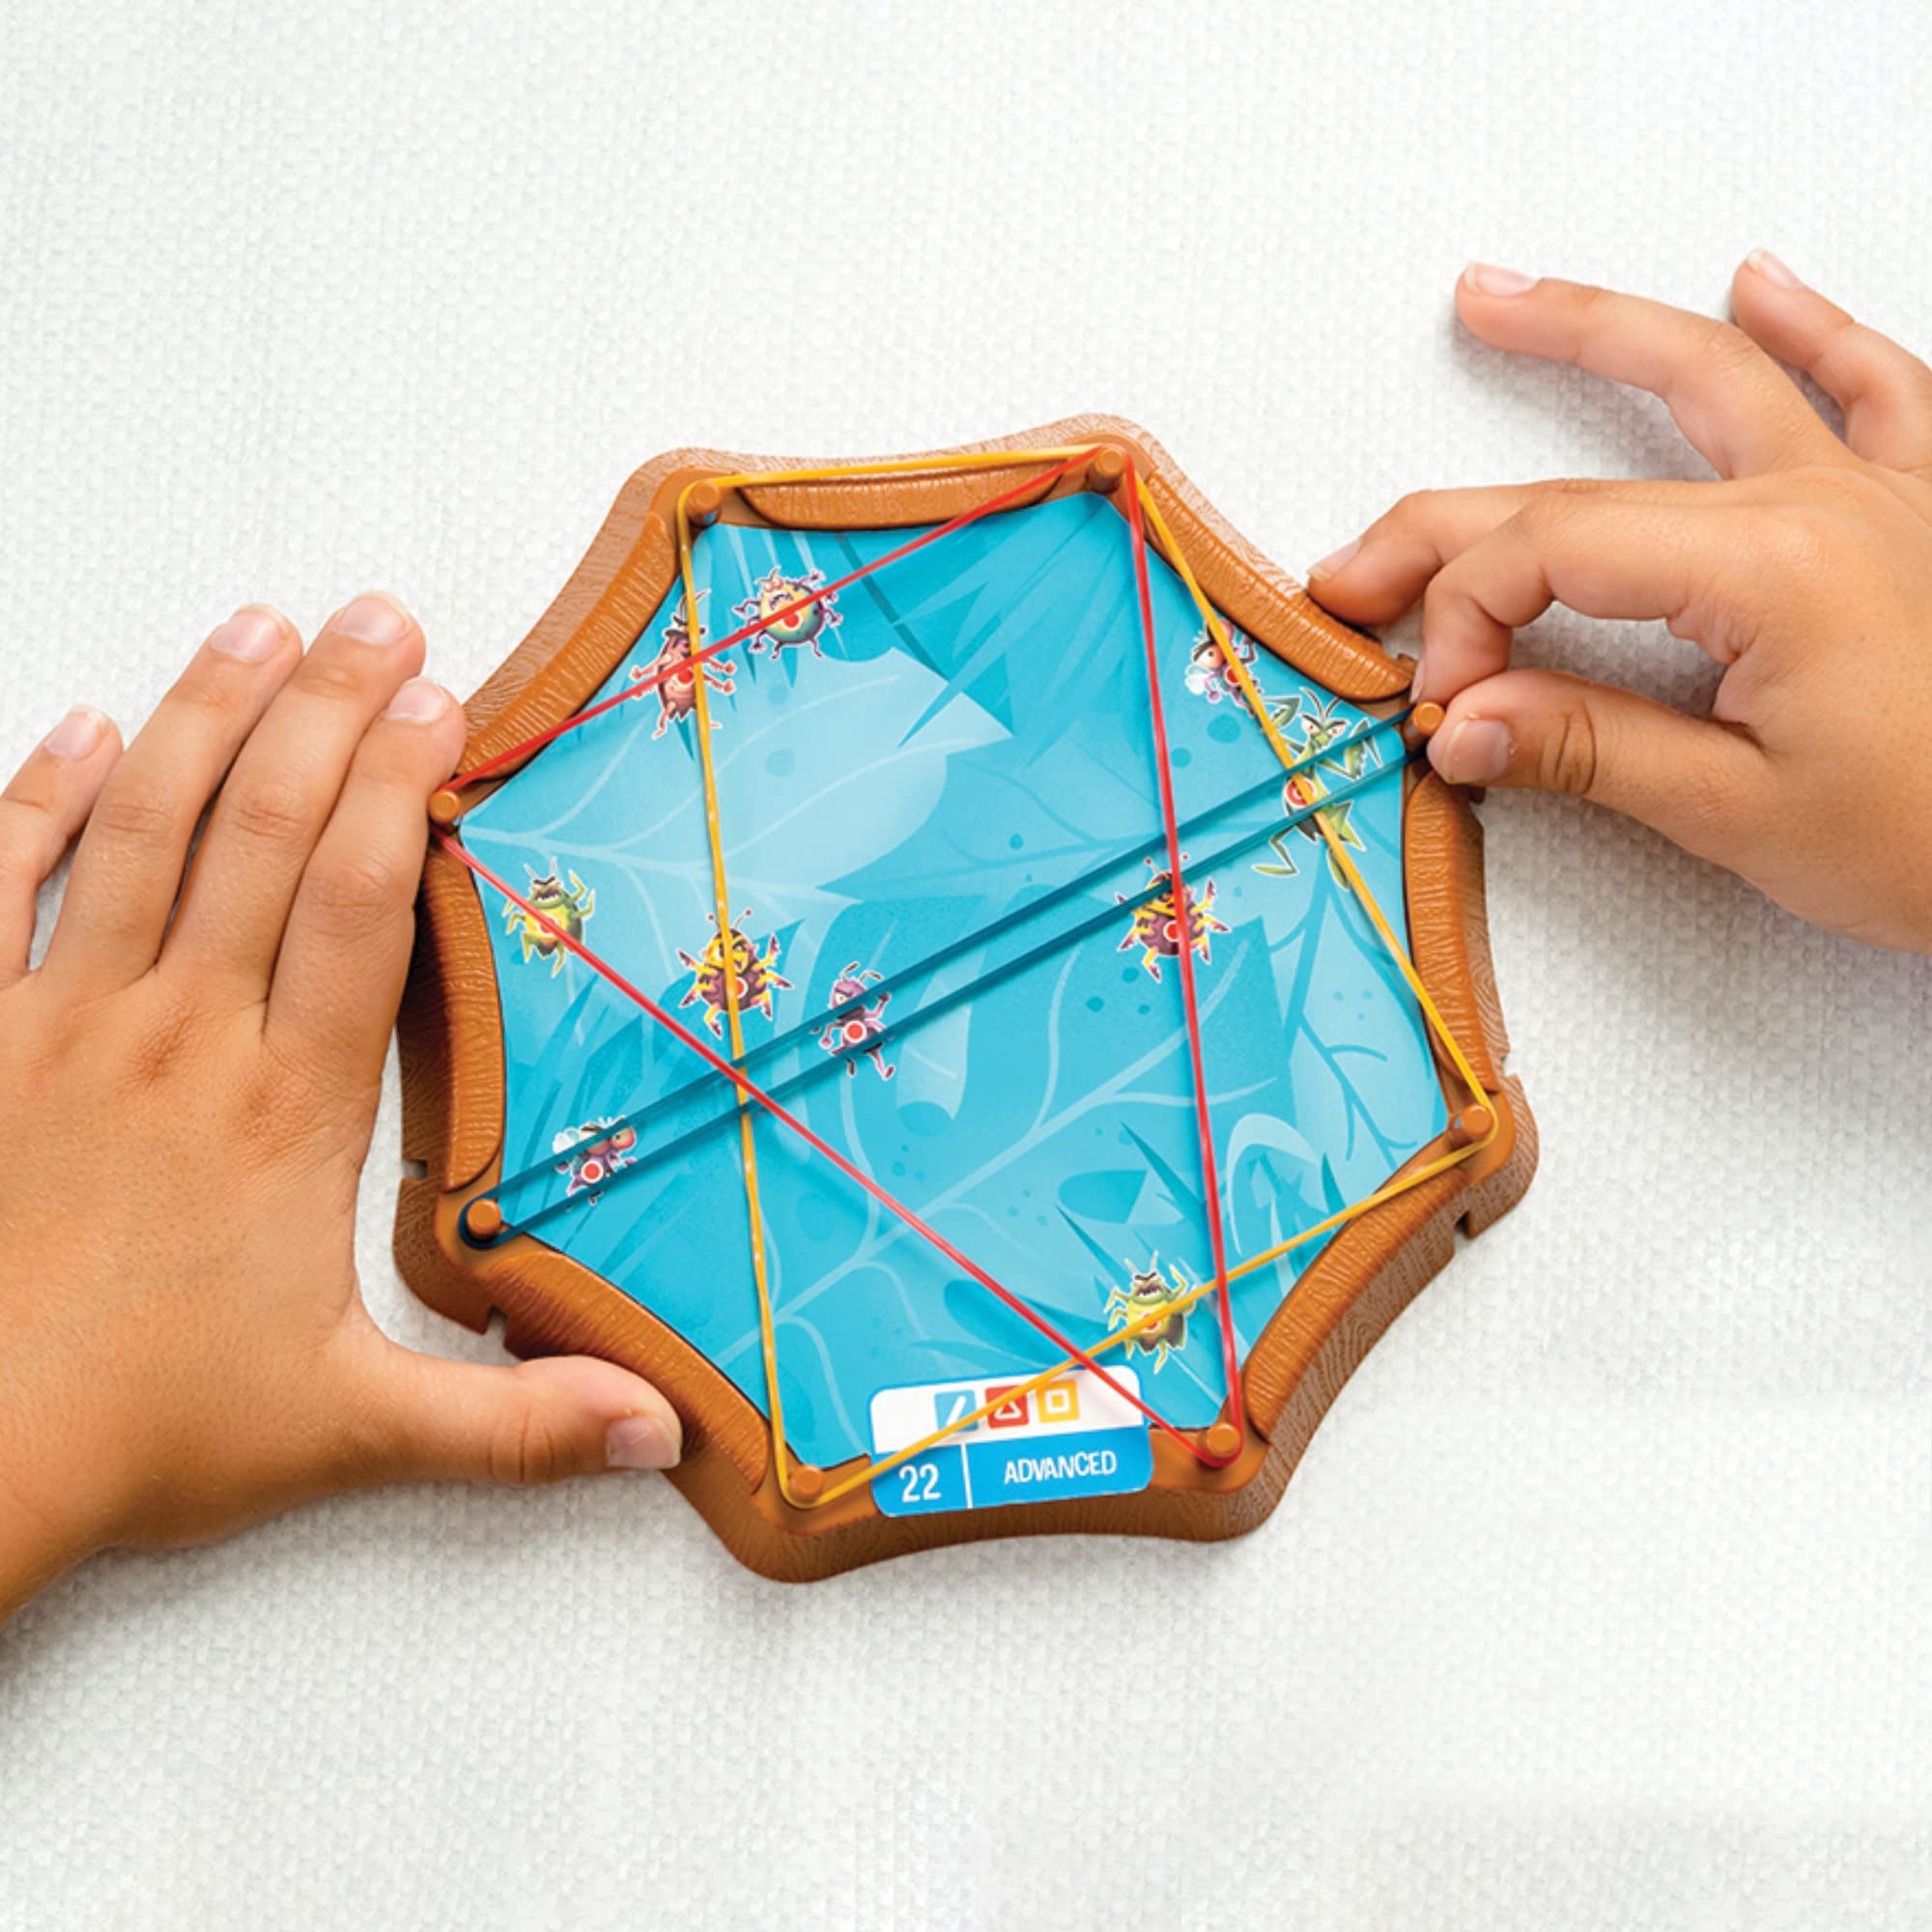 Spiderweb: A Bug-Catching Logic Game for Ages 8+